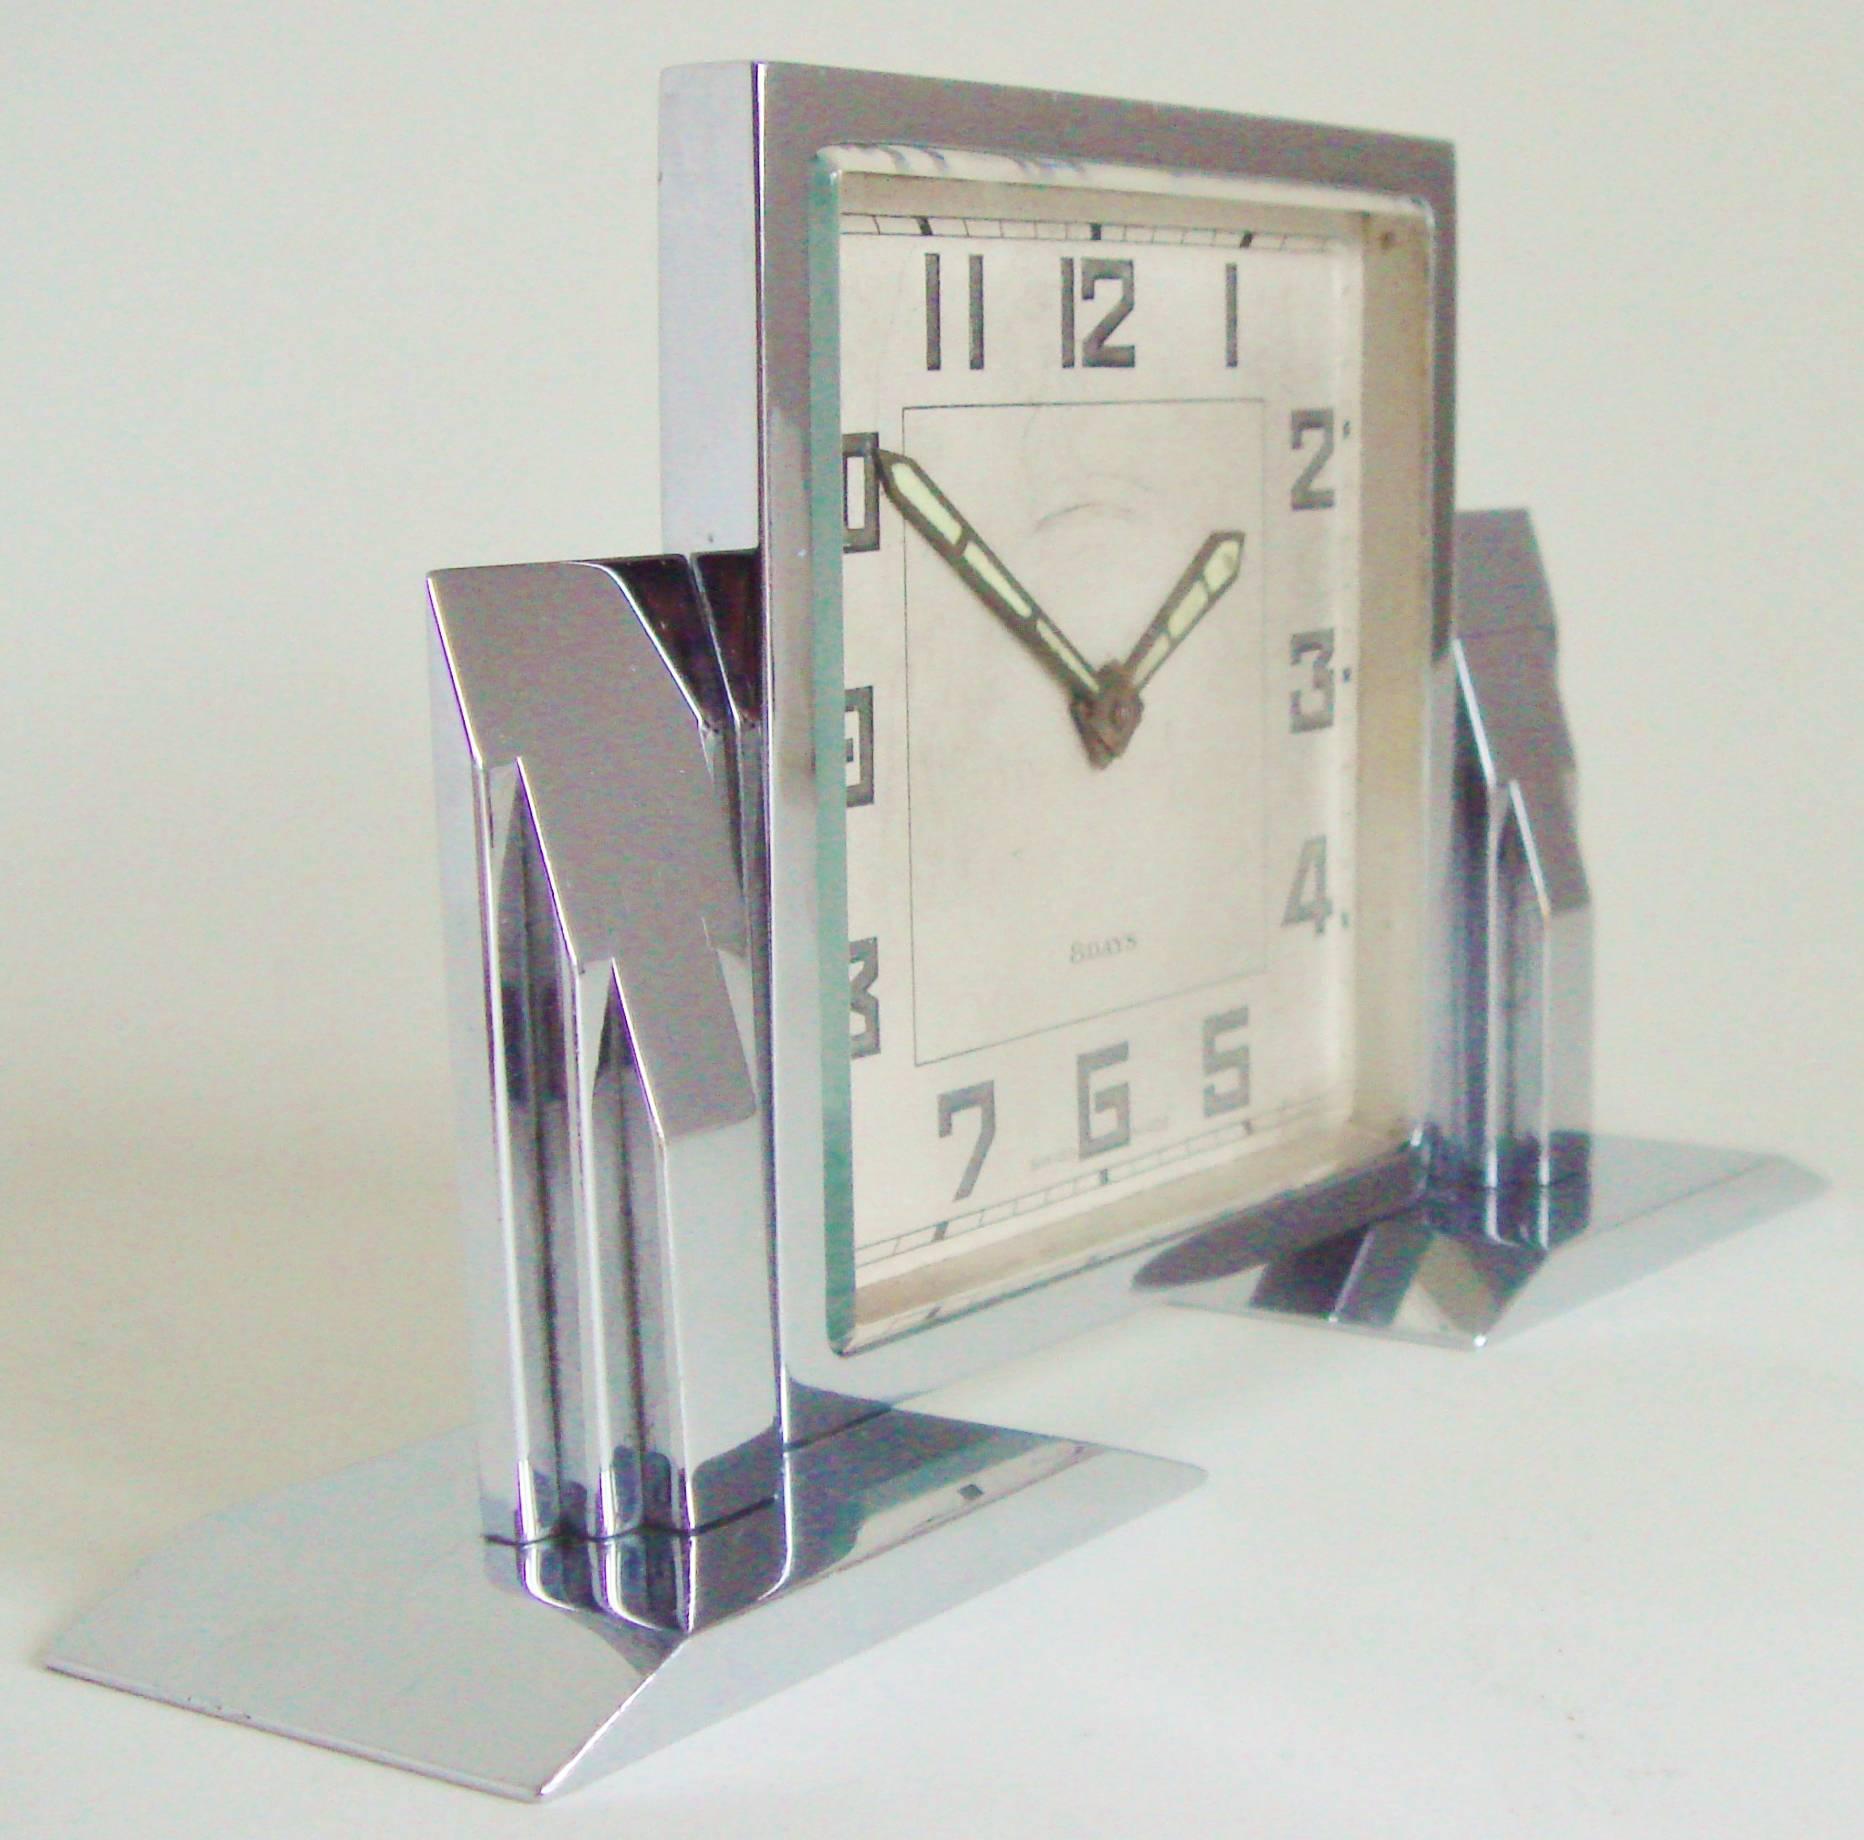 This is a beautiful and architecturally designed small Swiss Art Deco mechanical eight-day desk clock. It has its original chrome plate to both the front and back which is near perfect condition. The face shows only light age and there is a slight